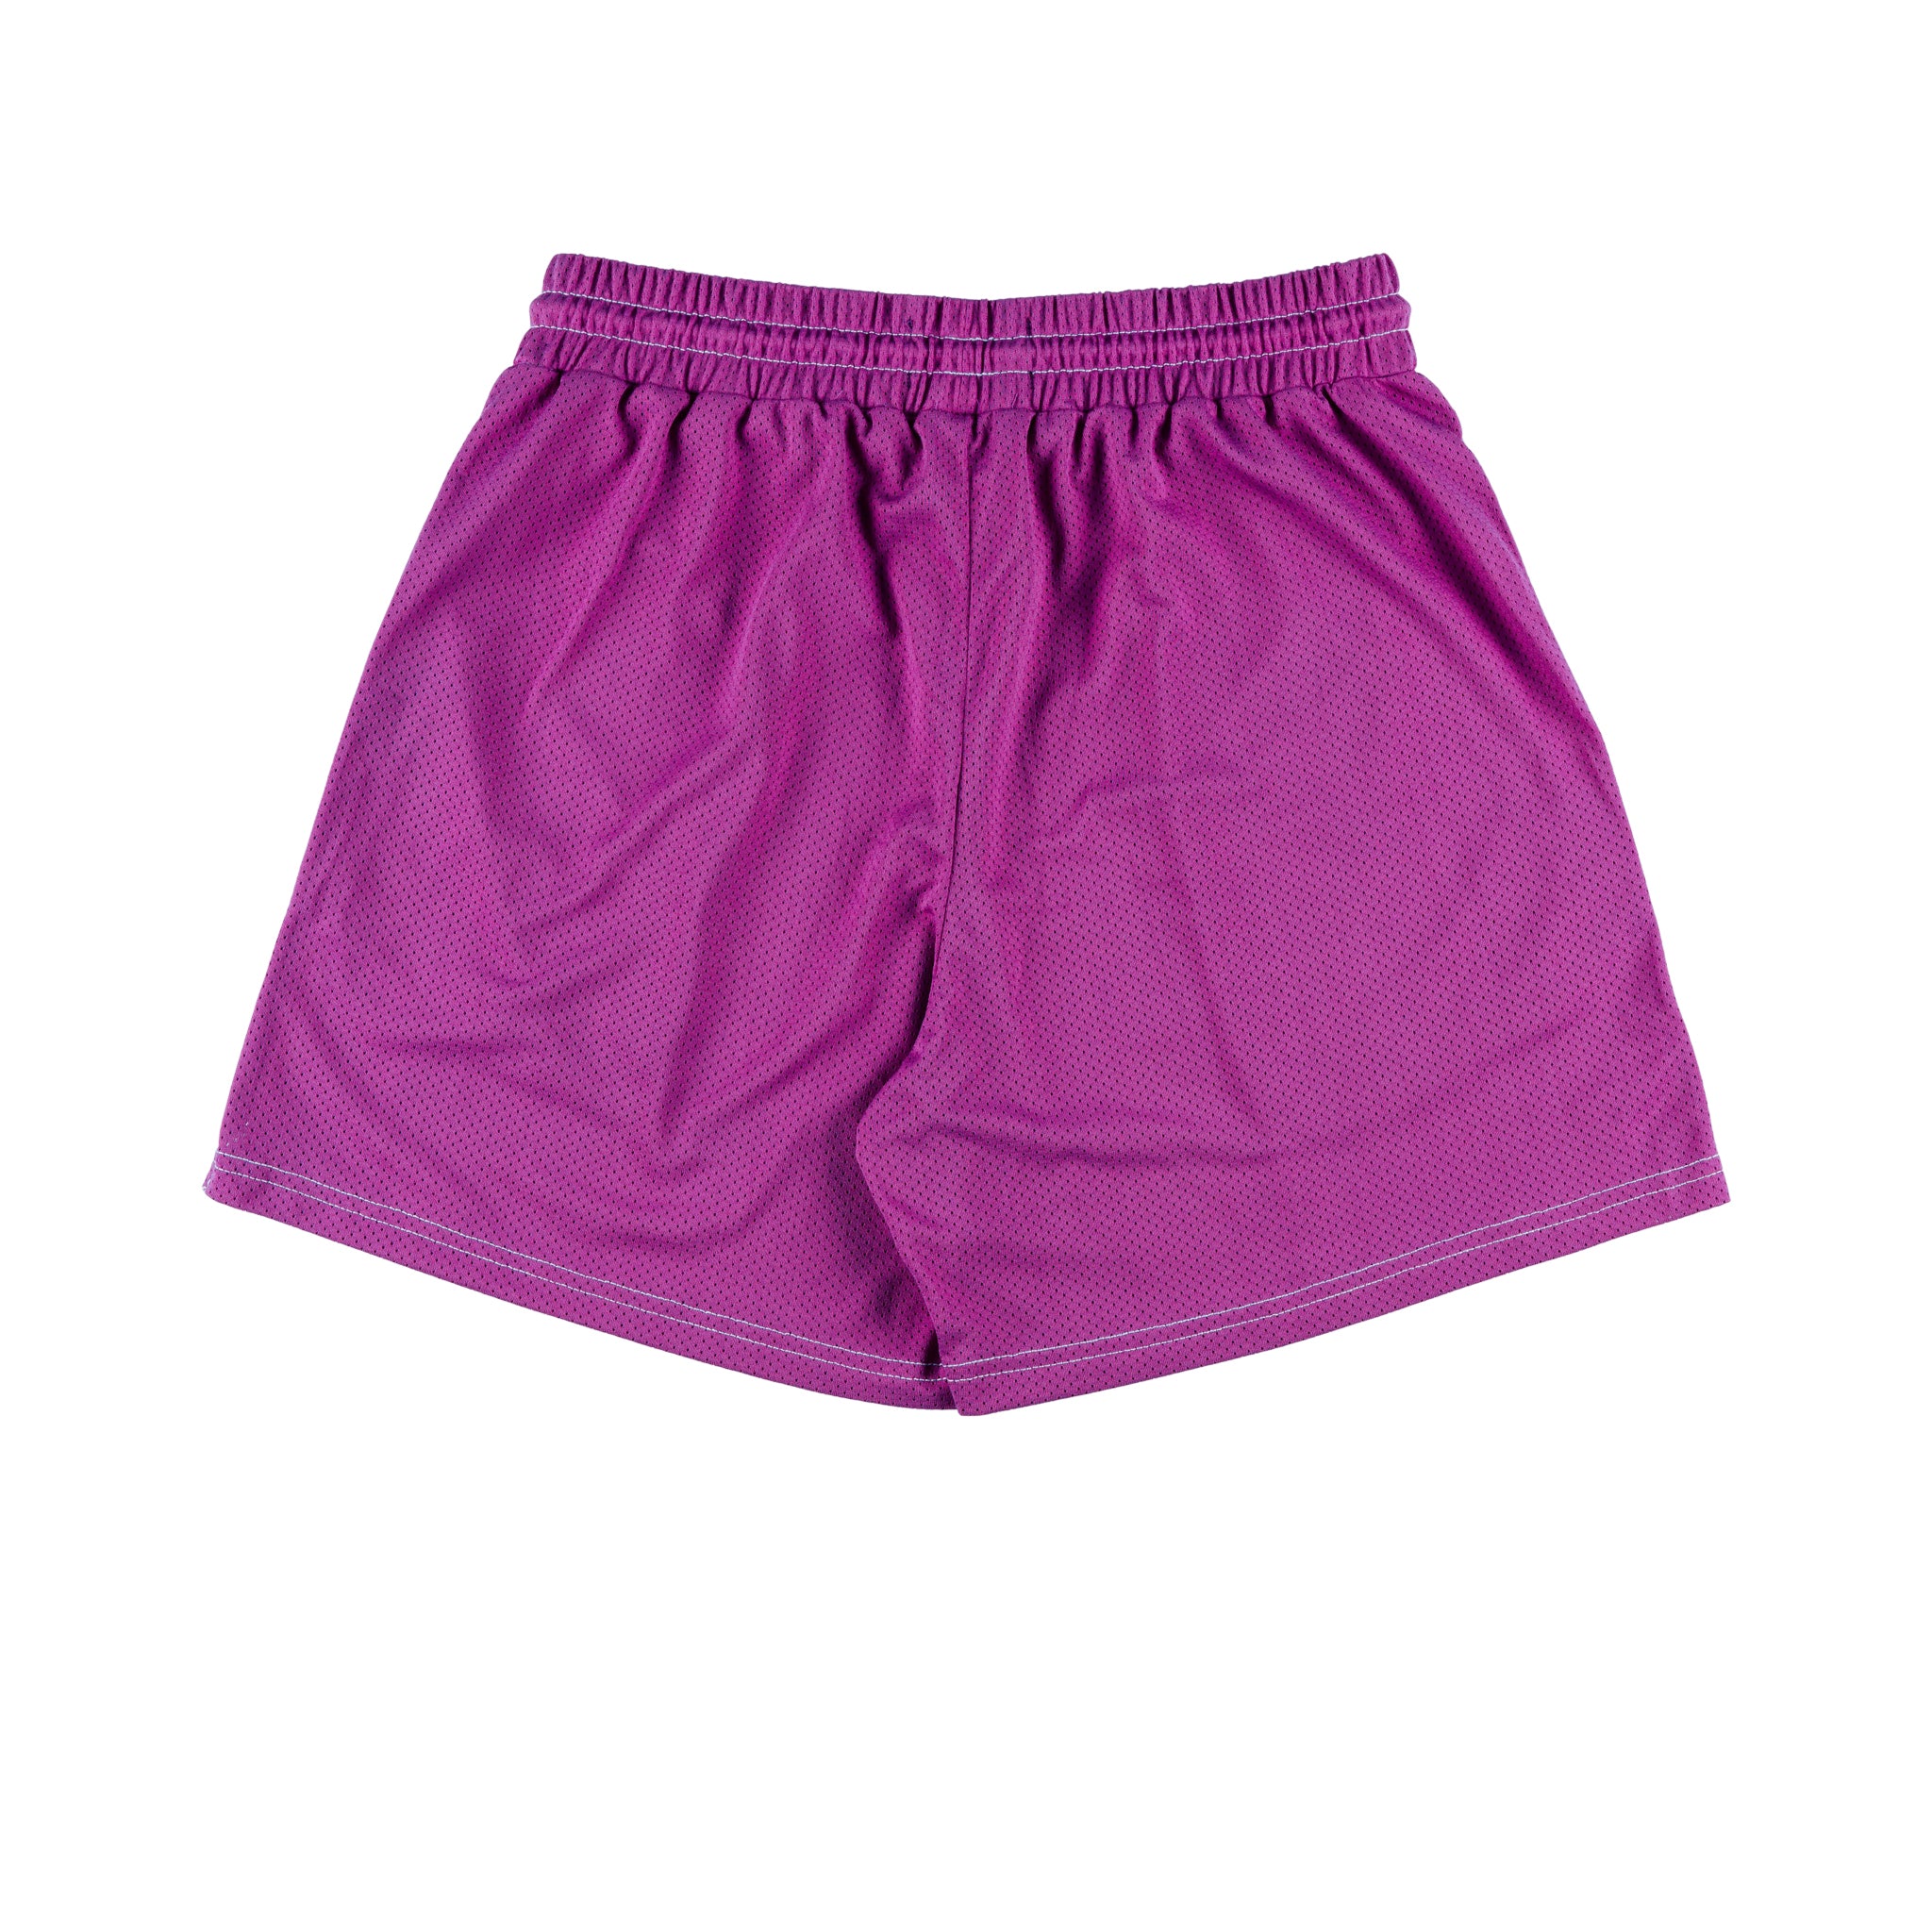 Common Hype Wildberry Contrast Stitching Mesh Short